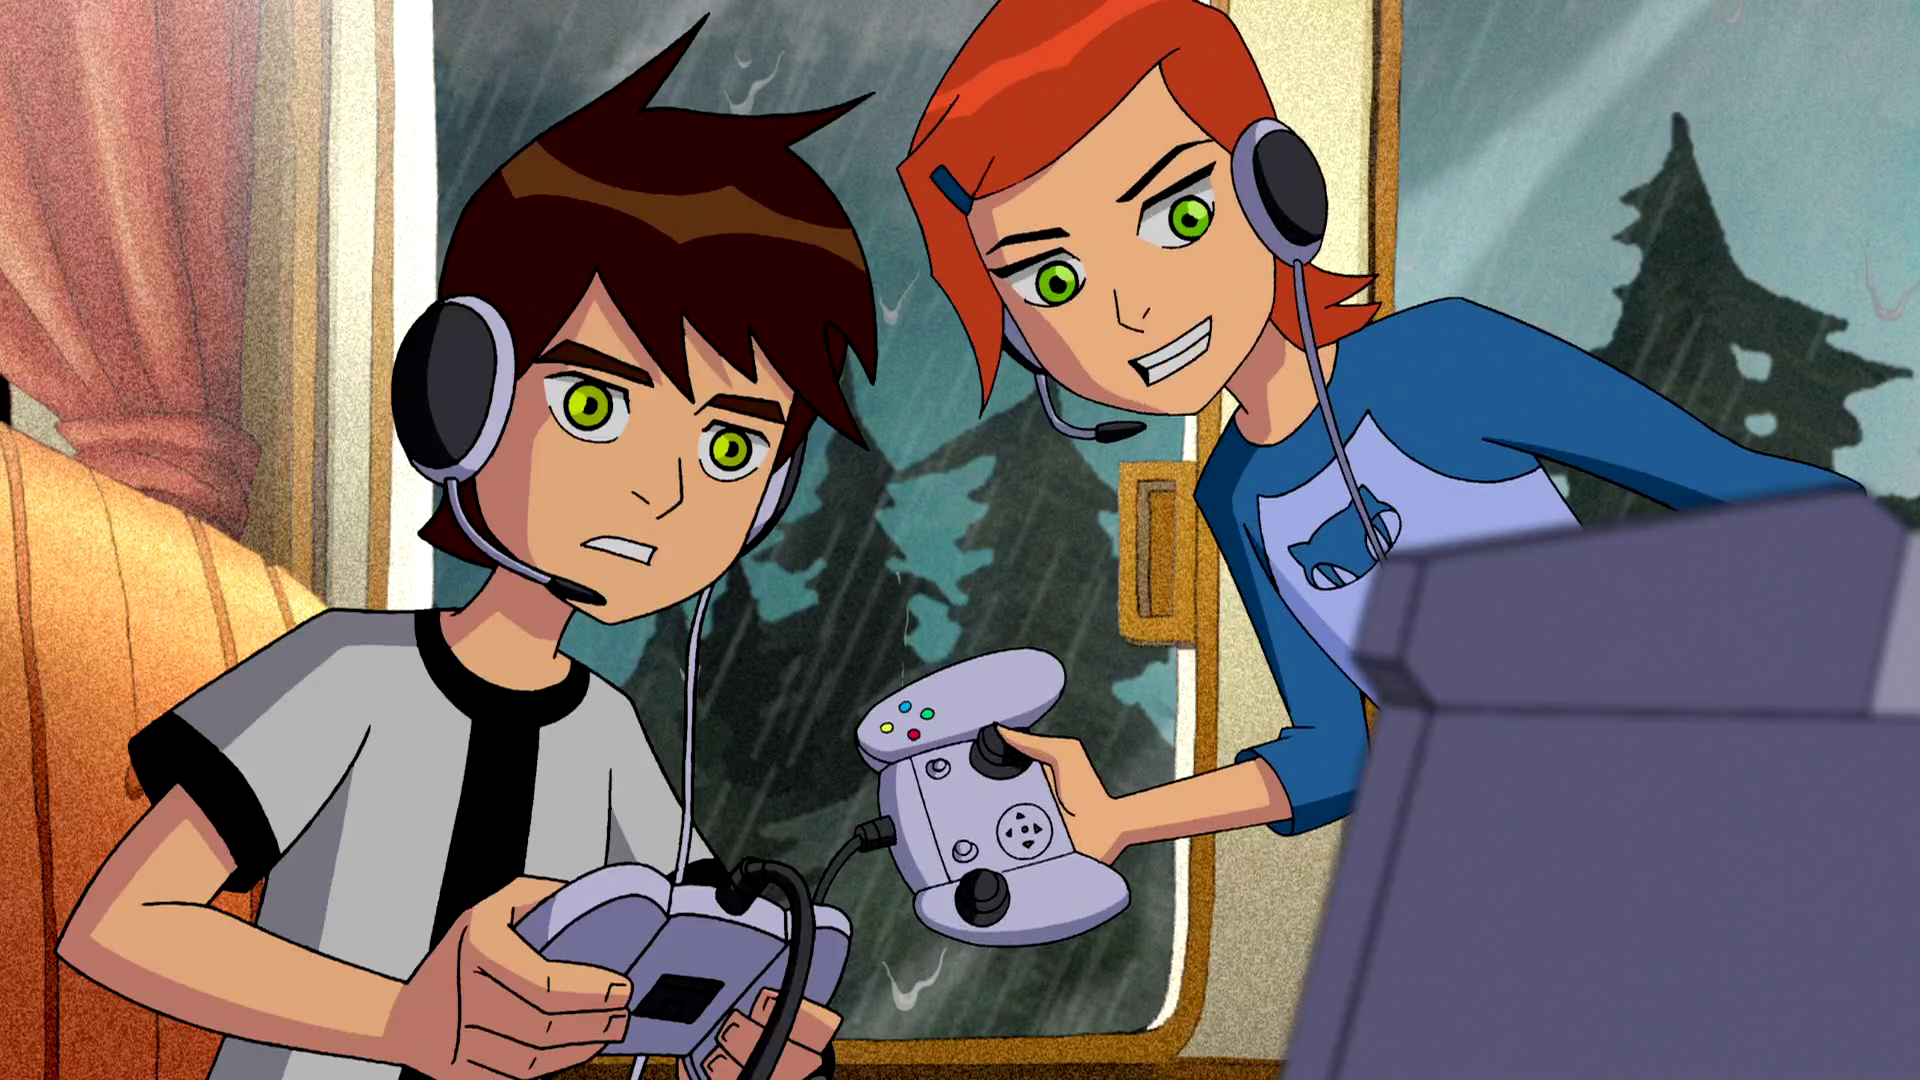 Game Over | Ben 10 Wiki | FANDOM powered by Wikia